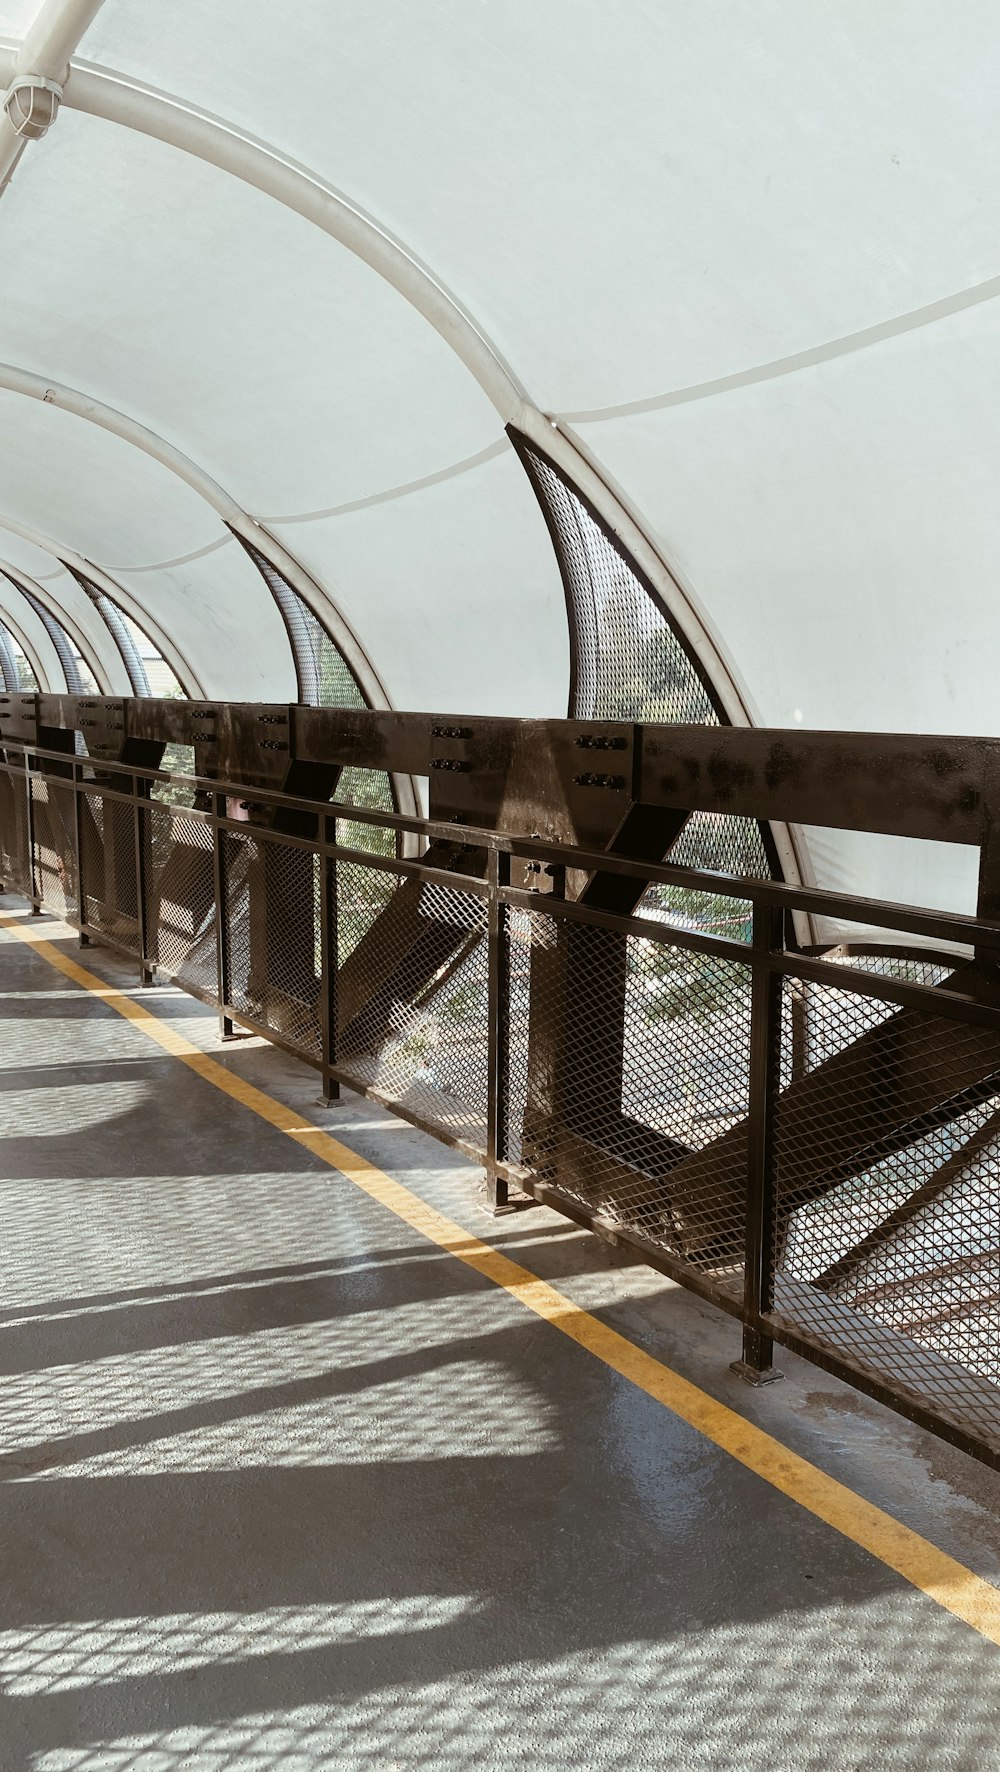 a walkway with metal railings and a yellow line